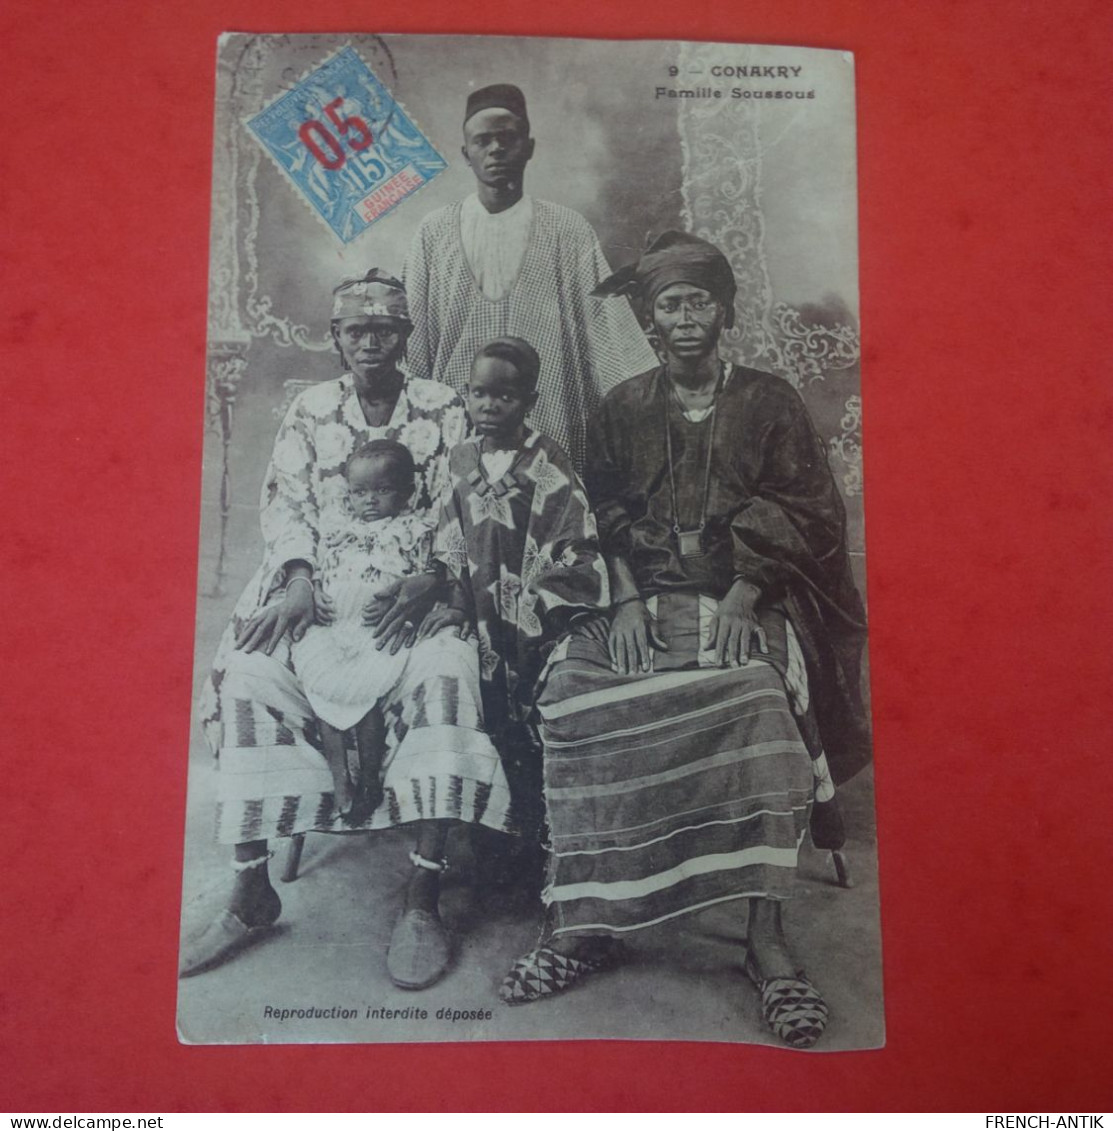 CONAKRY FAMILLE SOUSSOUS - Frans Guinee